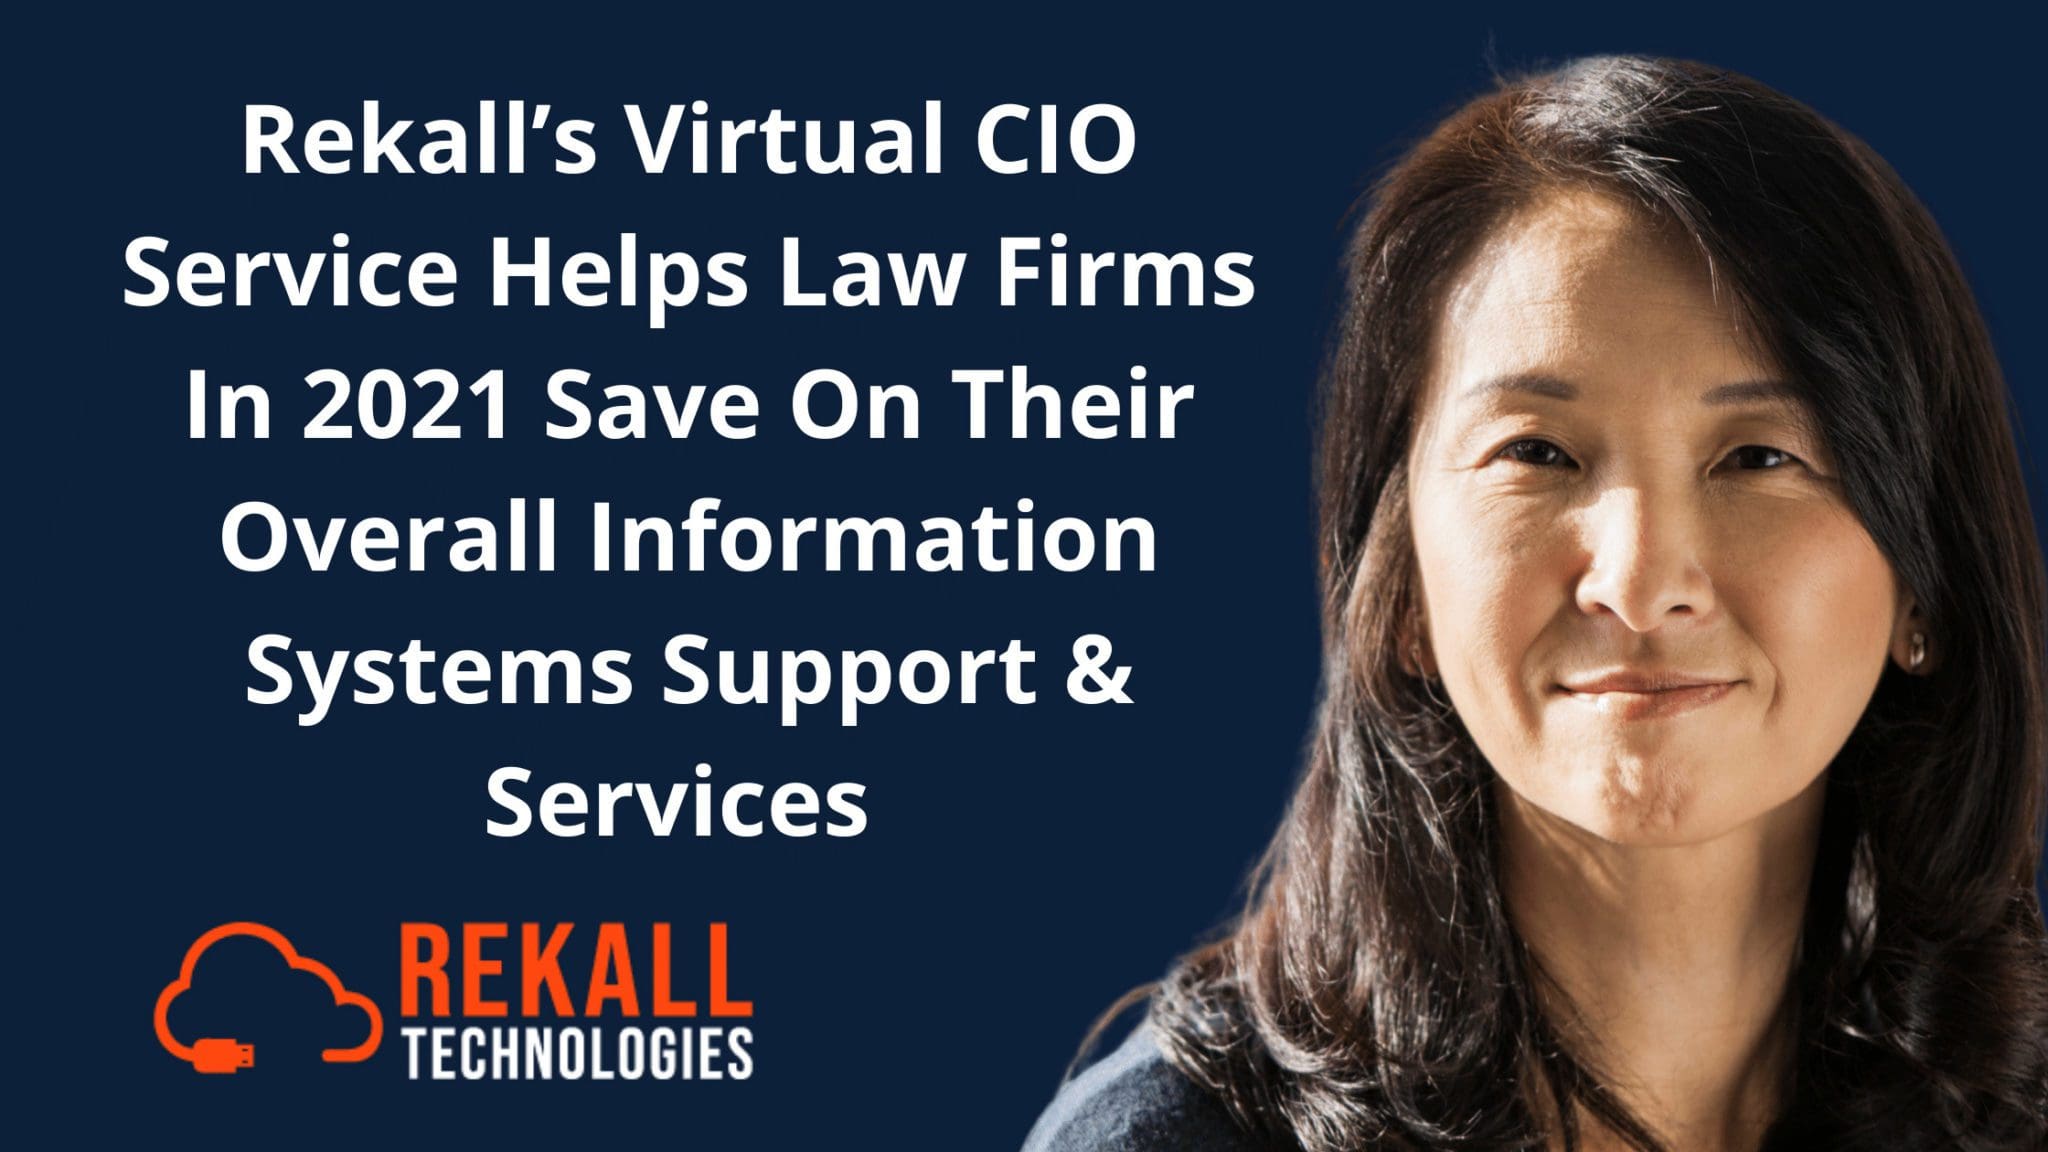 Rekall’s Virtual CIO Service Helps Law Firms In 2021 Save On Their Overall Information Systems Support & Services 